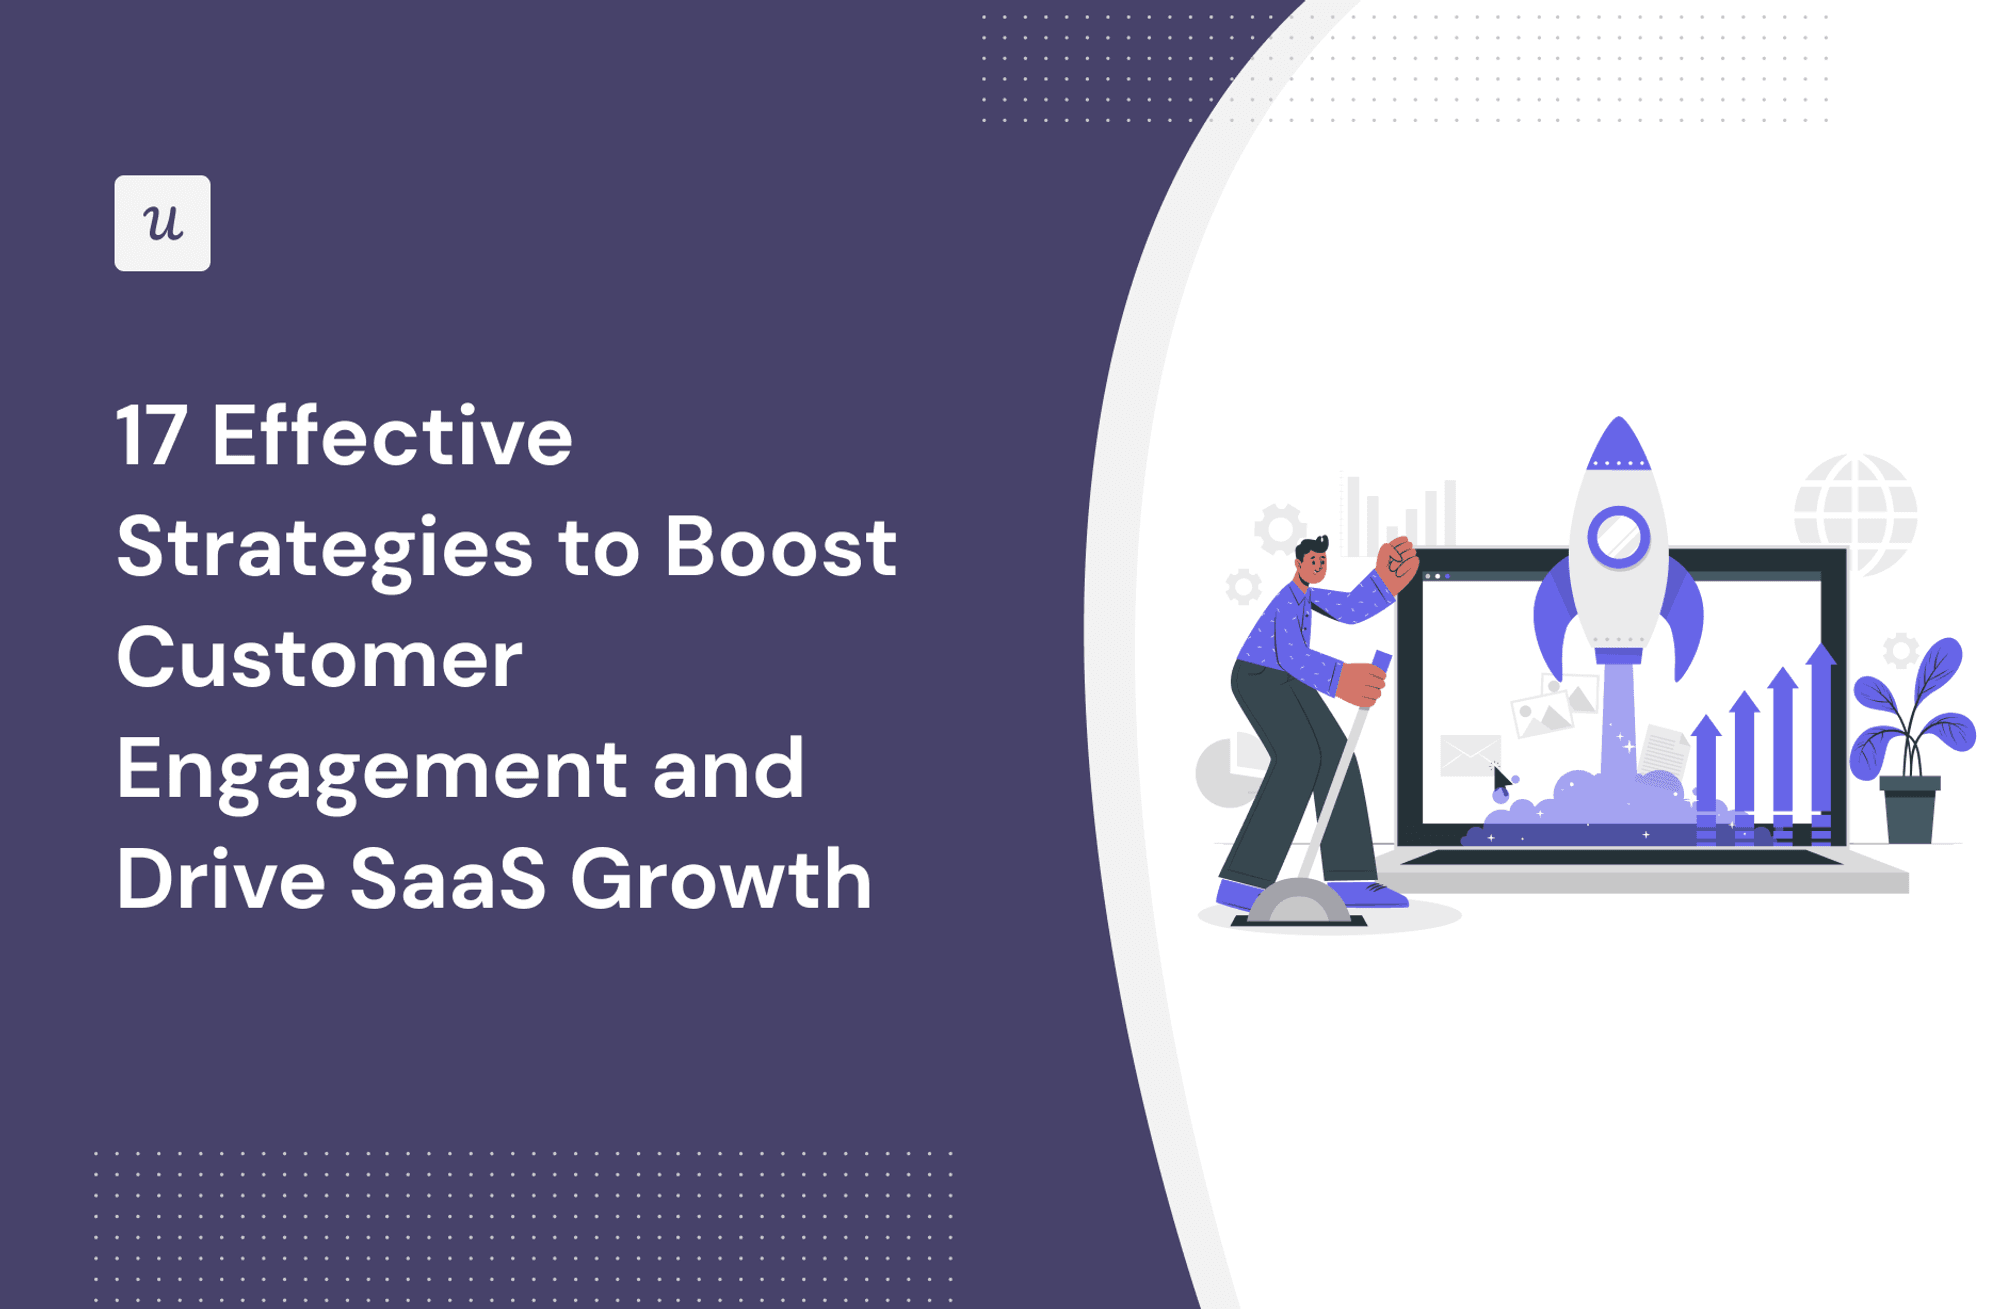 17 Effective Strategies to Boost Customer Engagement and Drive SaaS Growth cover